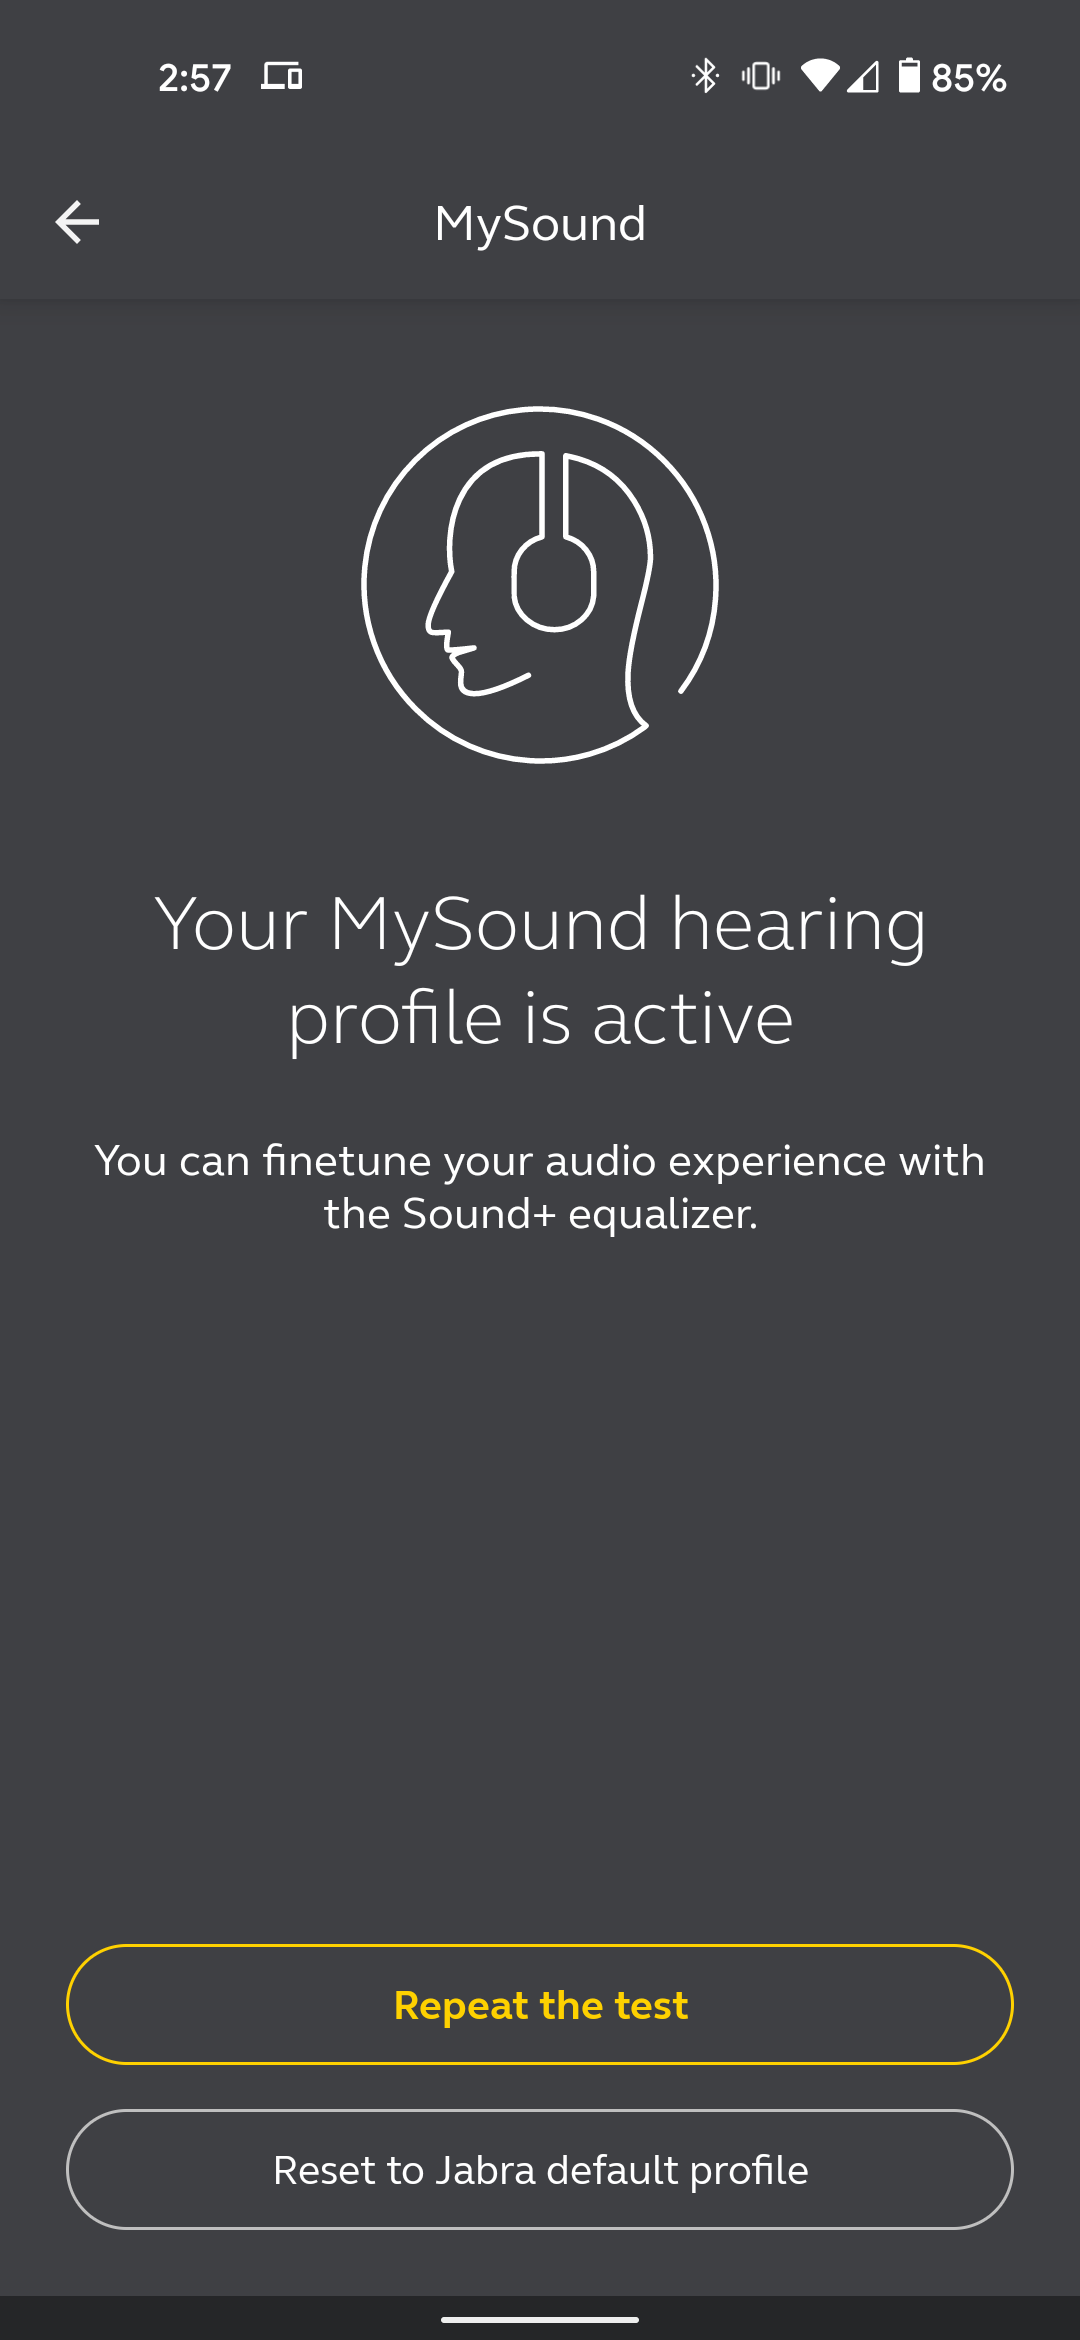 The Sound+ app with the MySound feature